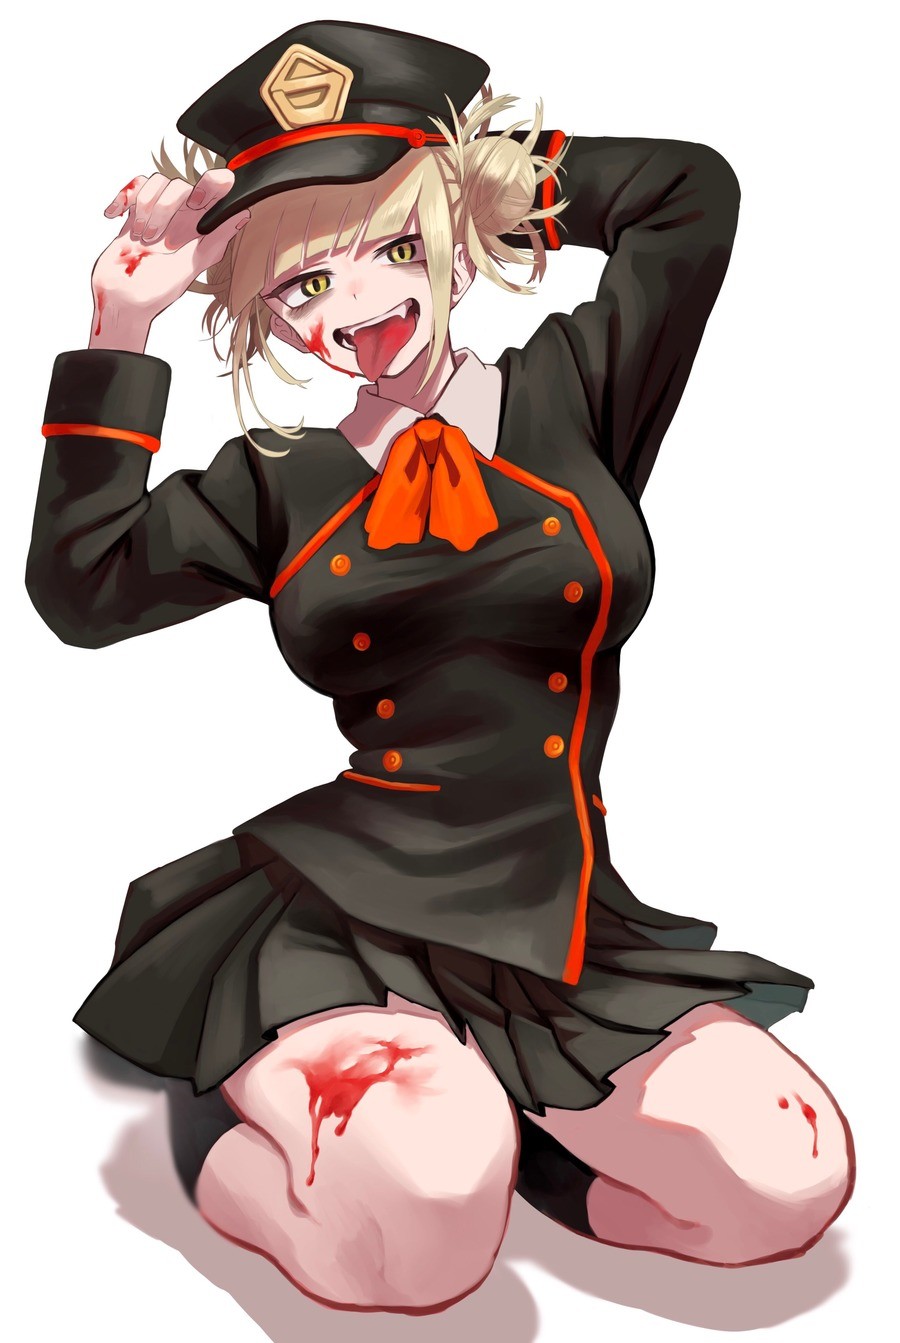 Daily Toga - 790: Togas New Uniform. join list: DailyToga (477 subs)Mention History Source: .. Cptbajusz and Blacksmithpanzer!